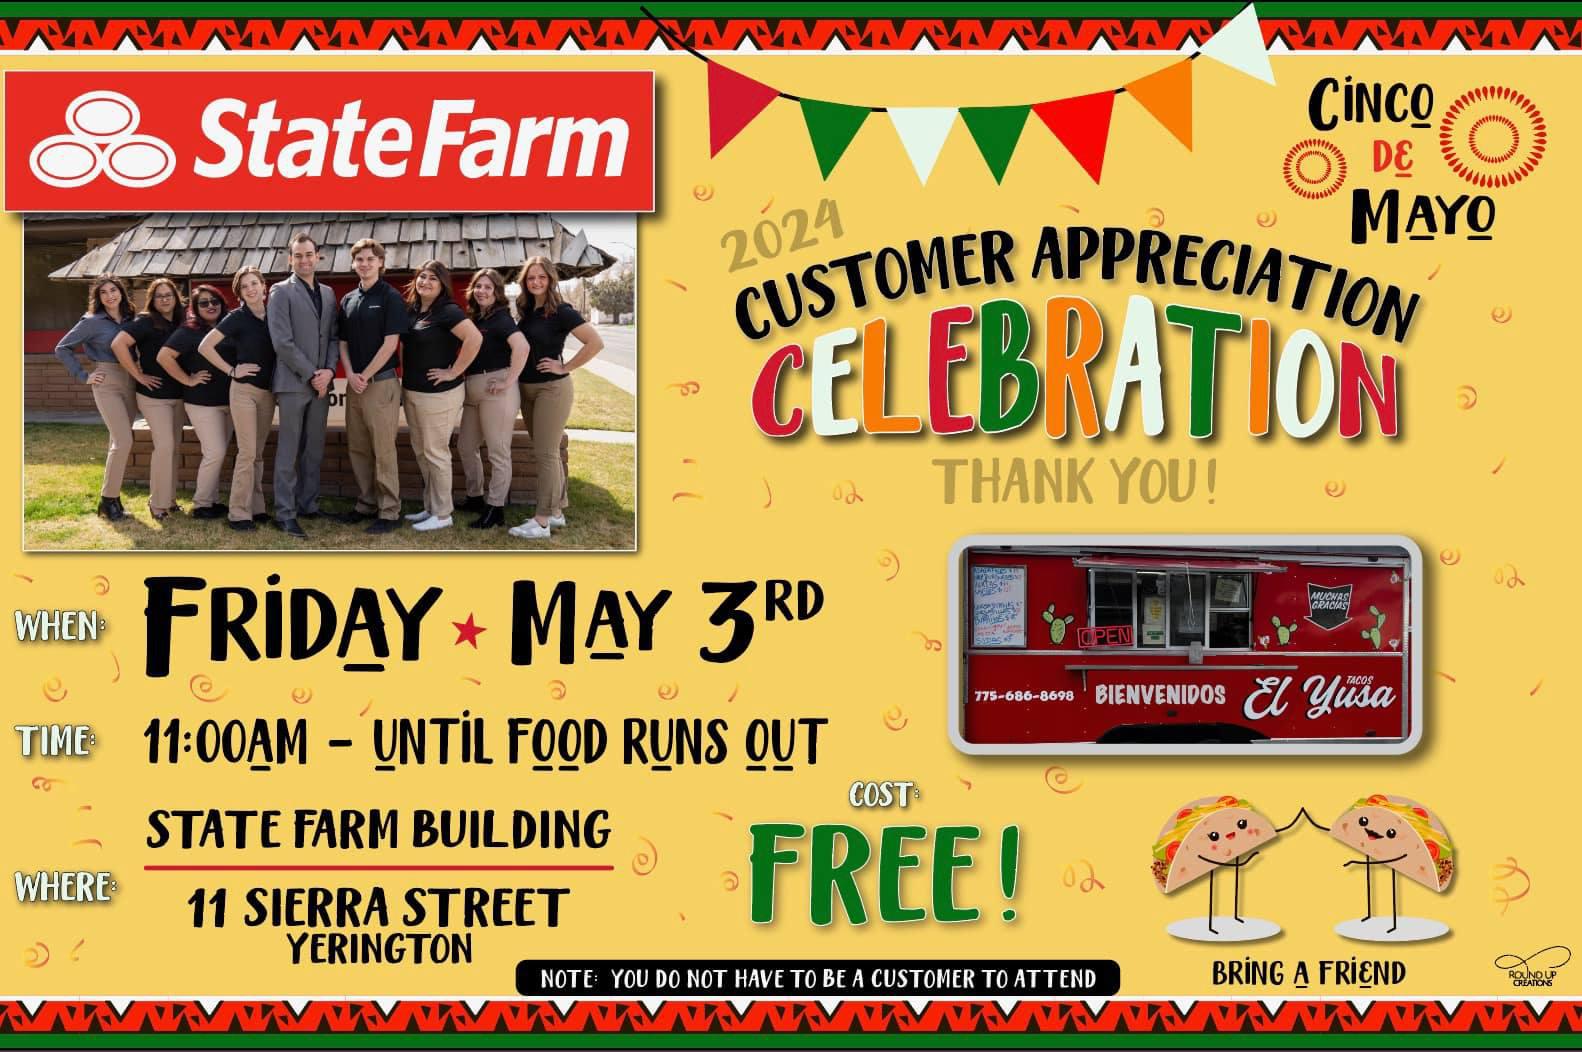 Come join us May 3rd! Tacos El Yusa food truck will be completely free on us! Until Food runs out!